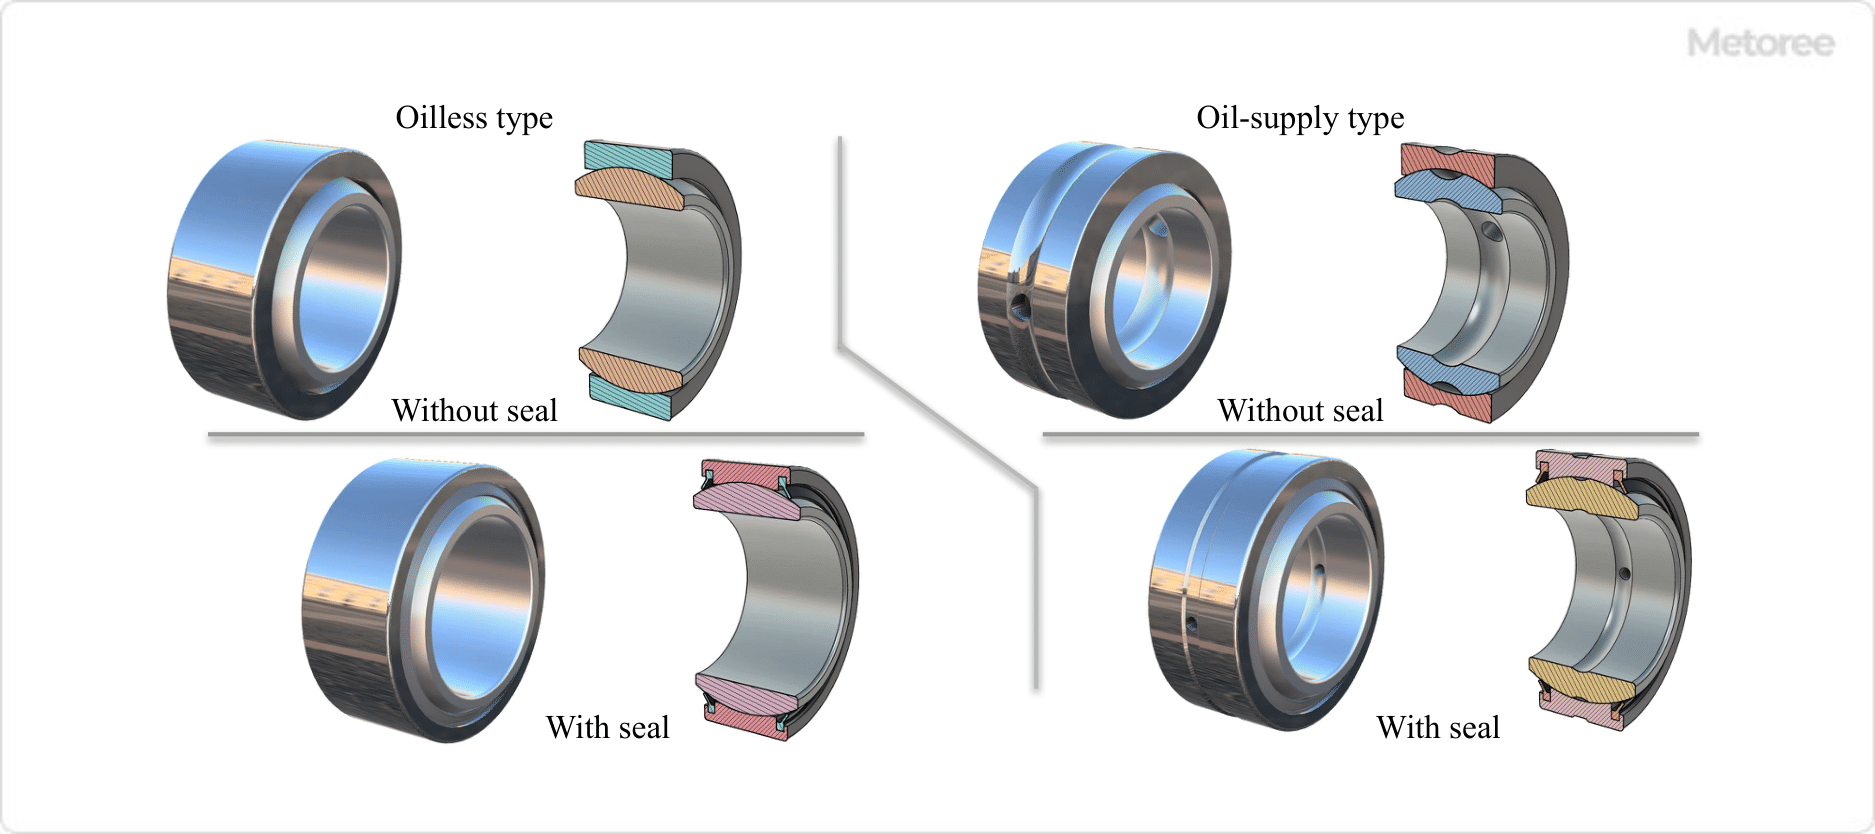 Figure 3. Shape of spherical plain bearings due to structural differences